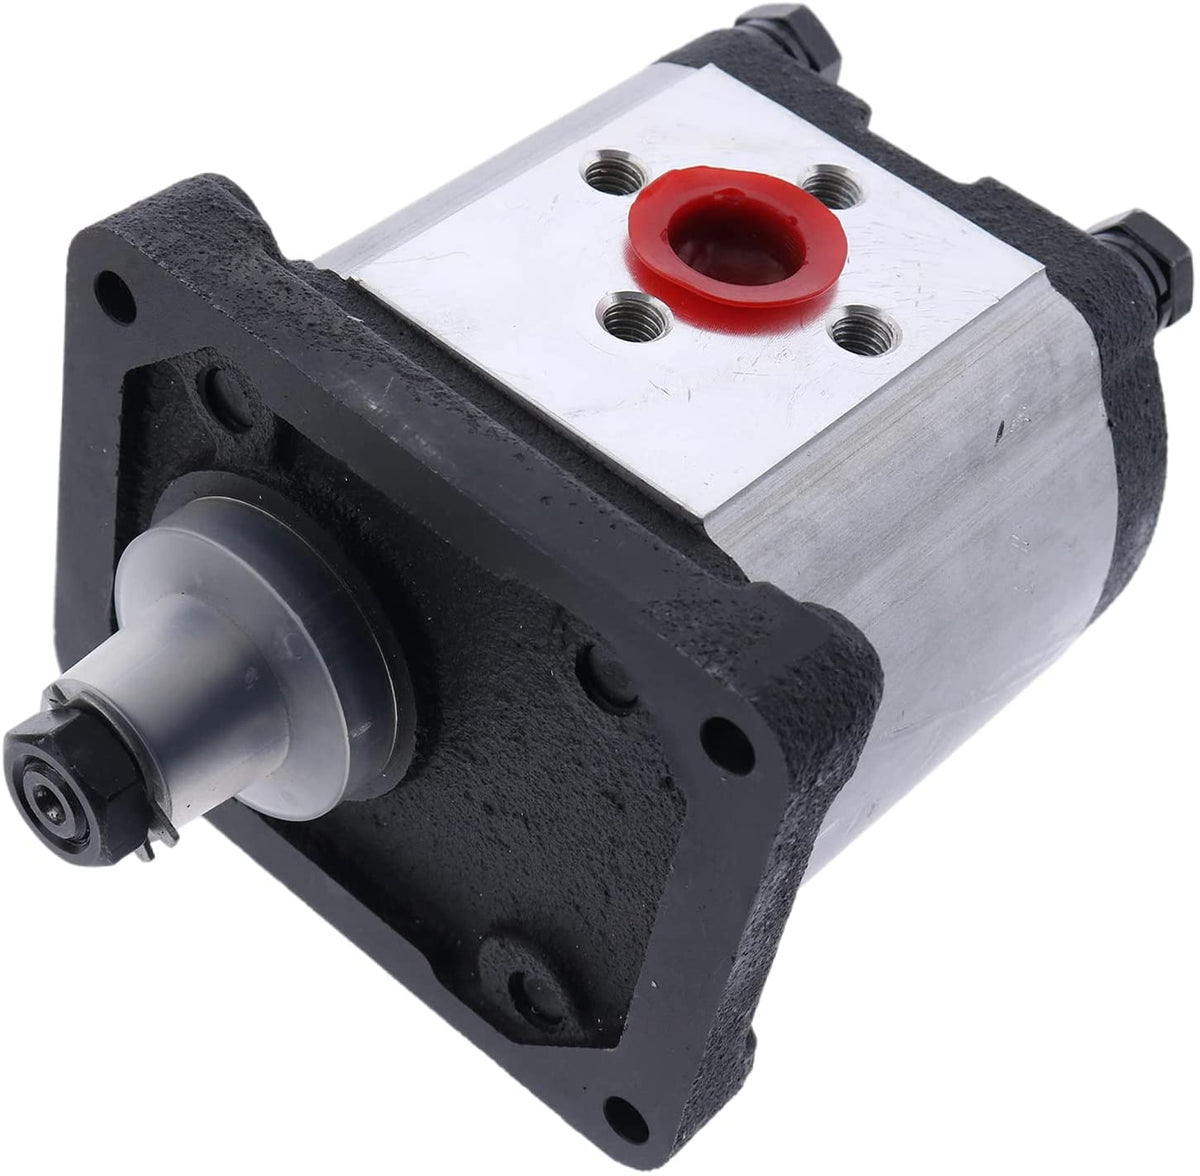 Hydraulic Pump 5129488 5169770 compatible with New Holland Tractor 100-90 110-90 115-90 130-90 140-90 160-90 180-90 55-66 60-66 60-90 65-90 - KUDUPARTS